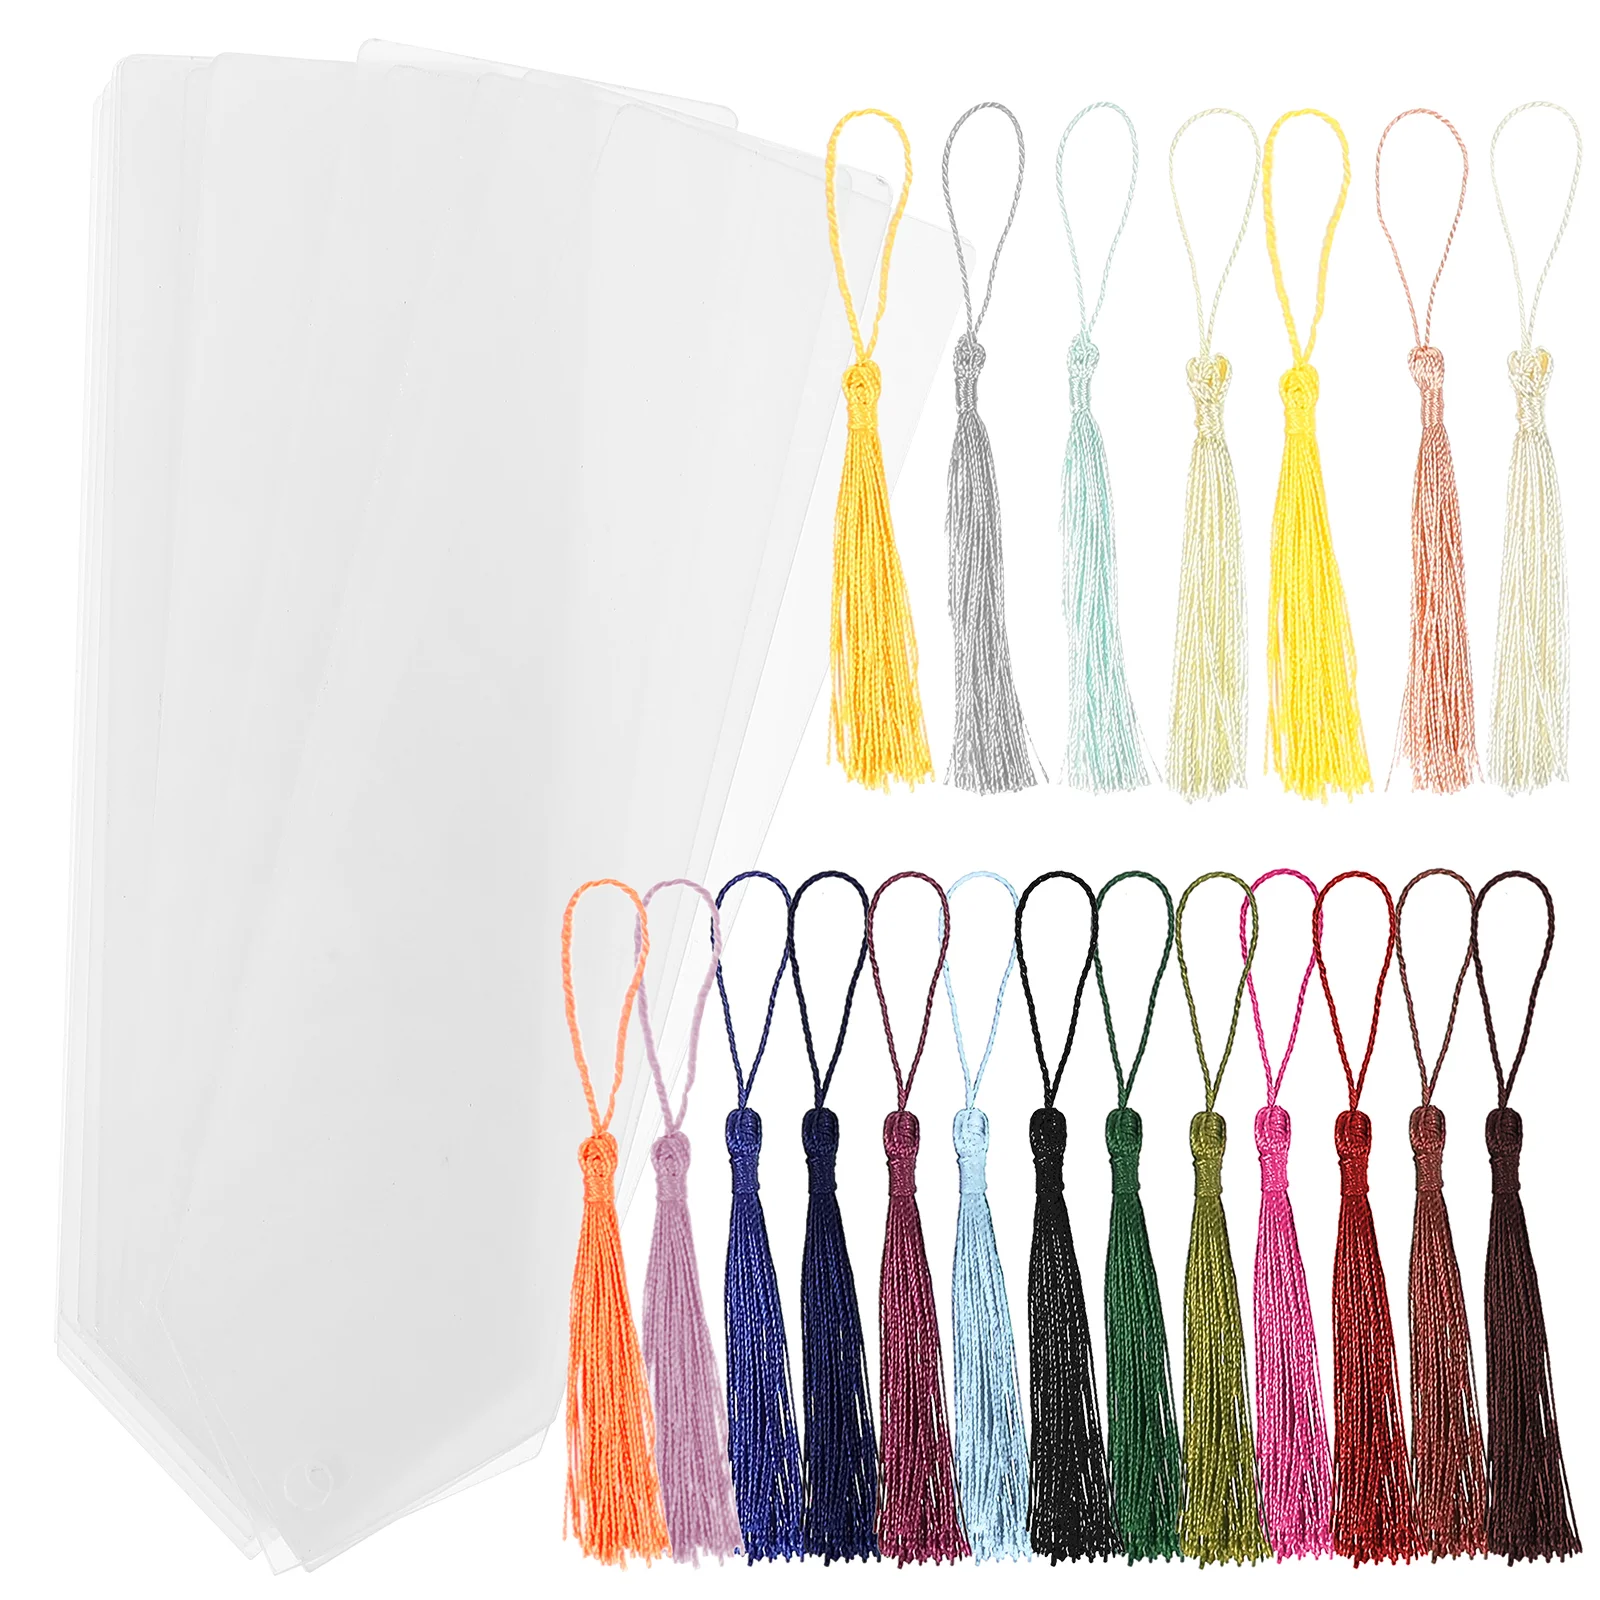 

Blank Bookmark Clear Bookmarks Acrylic Blanks Colorful Tassels Designed Delicate Page Marker